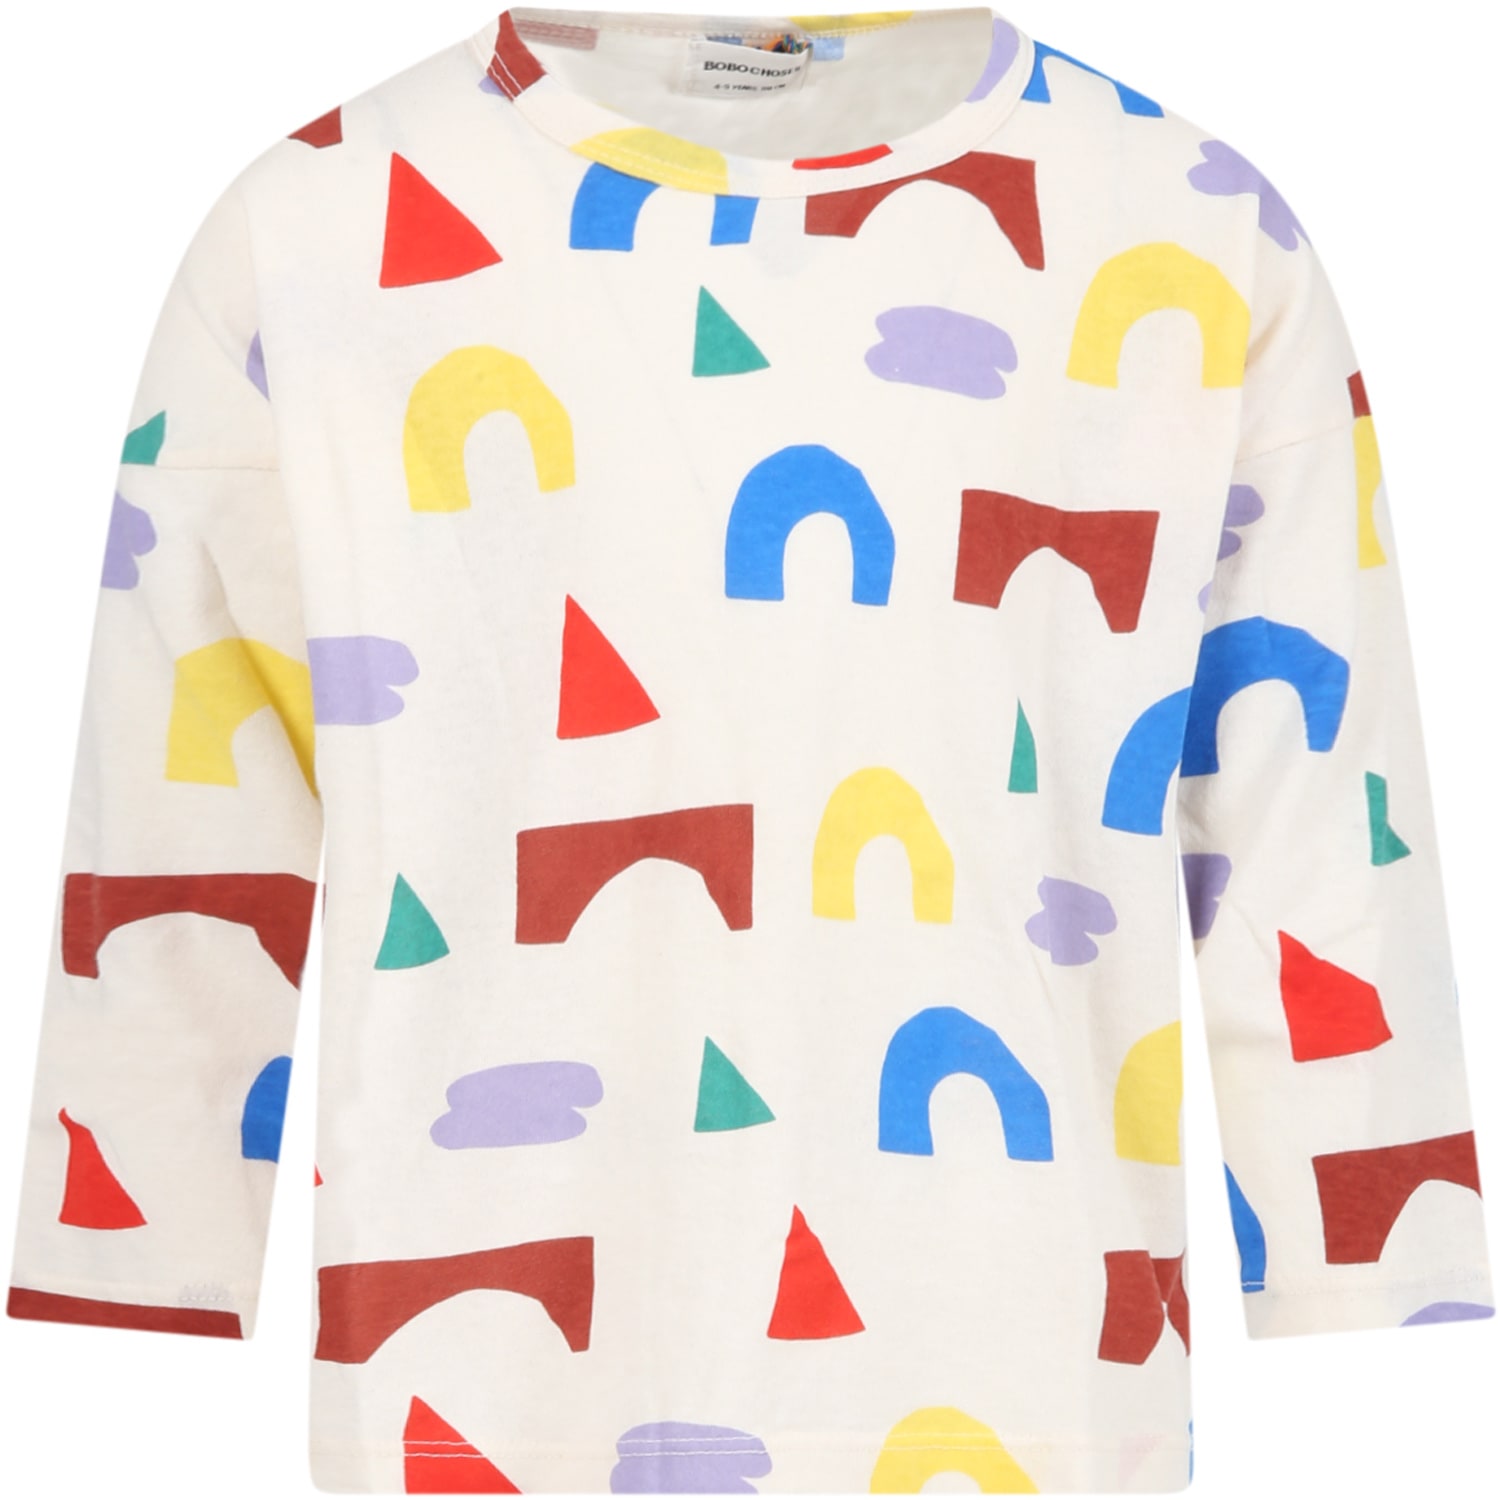 Bobo Choses Ivory T-shirt For Kids With Colorful Designs